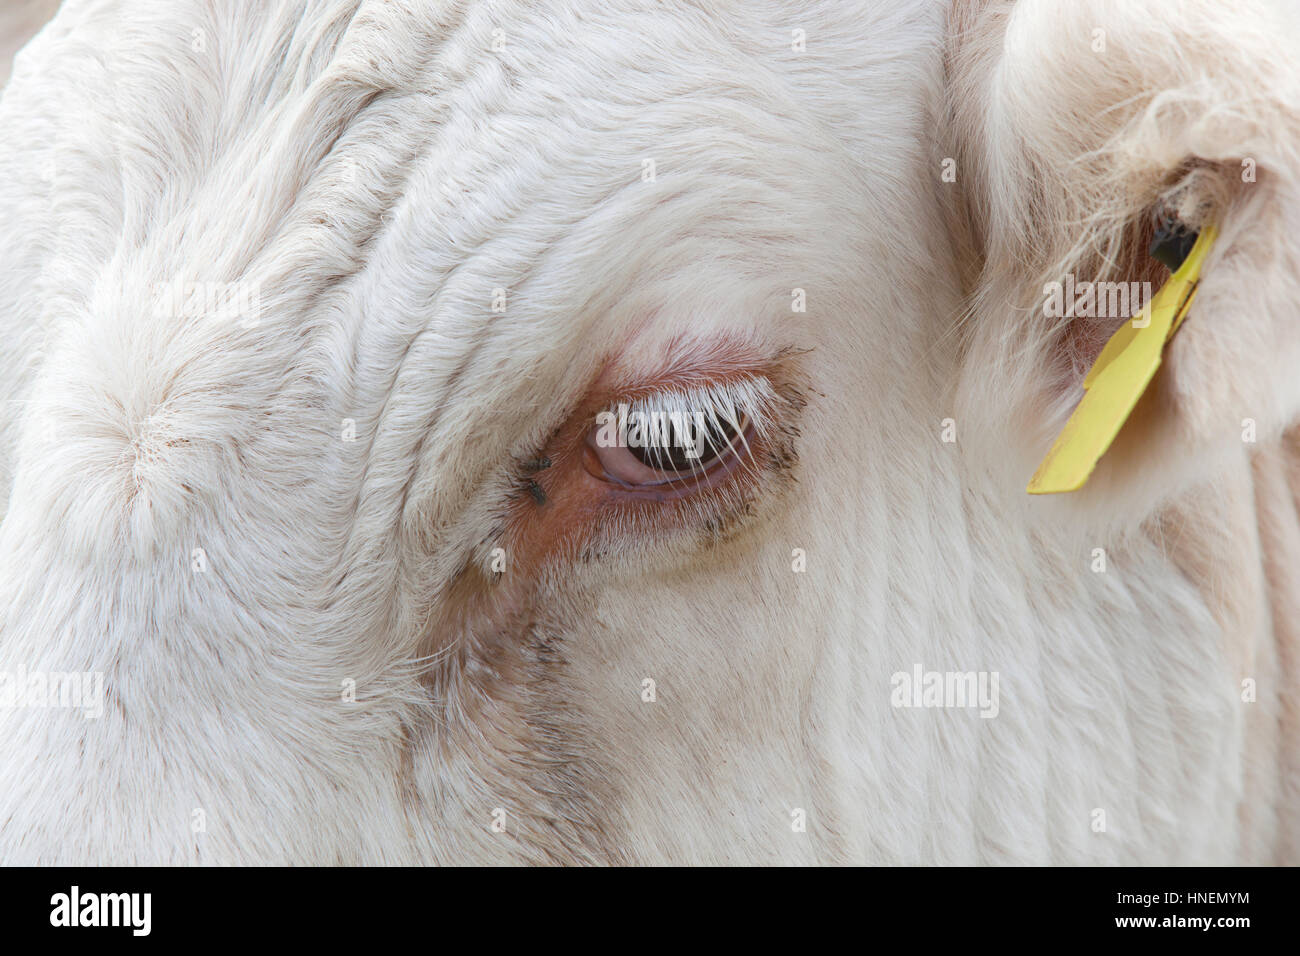 Close-up view of a Cow's eye in Essex, United Kingdom Stock Photo